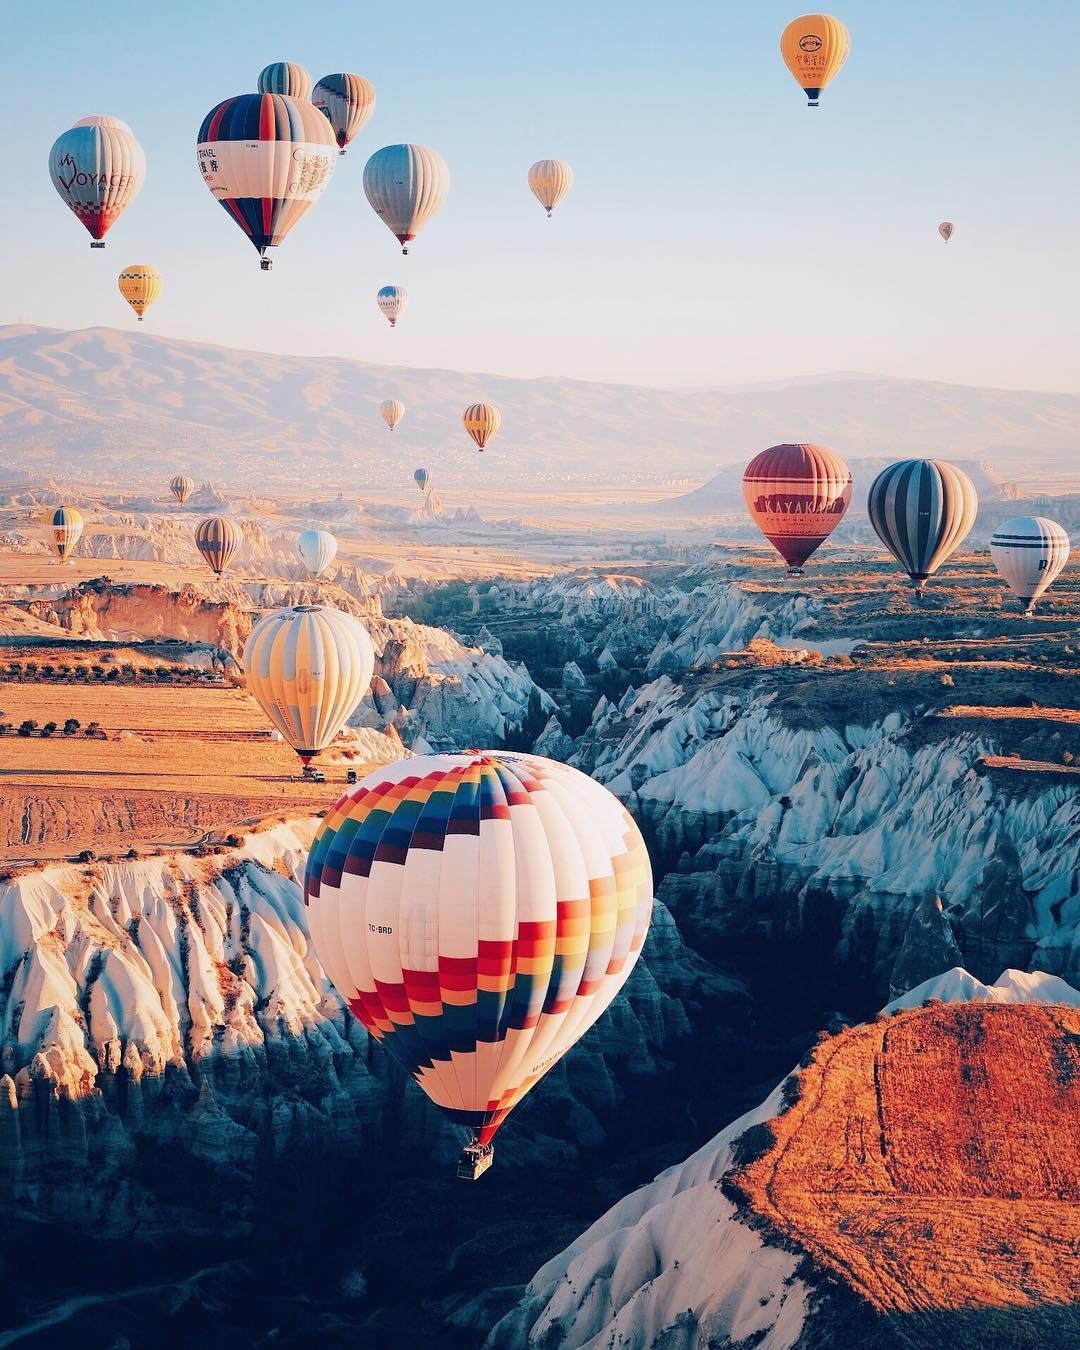 A large number of hot air balloons flying in the sky - Hot air balloons